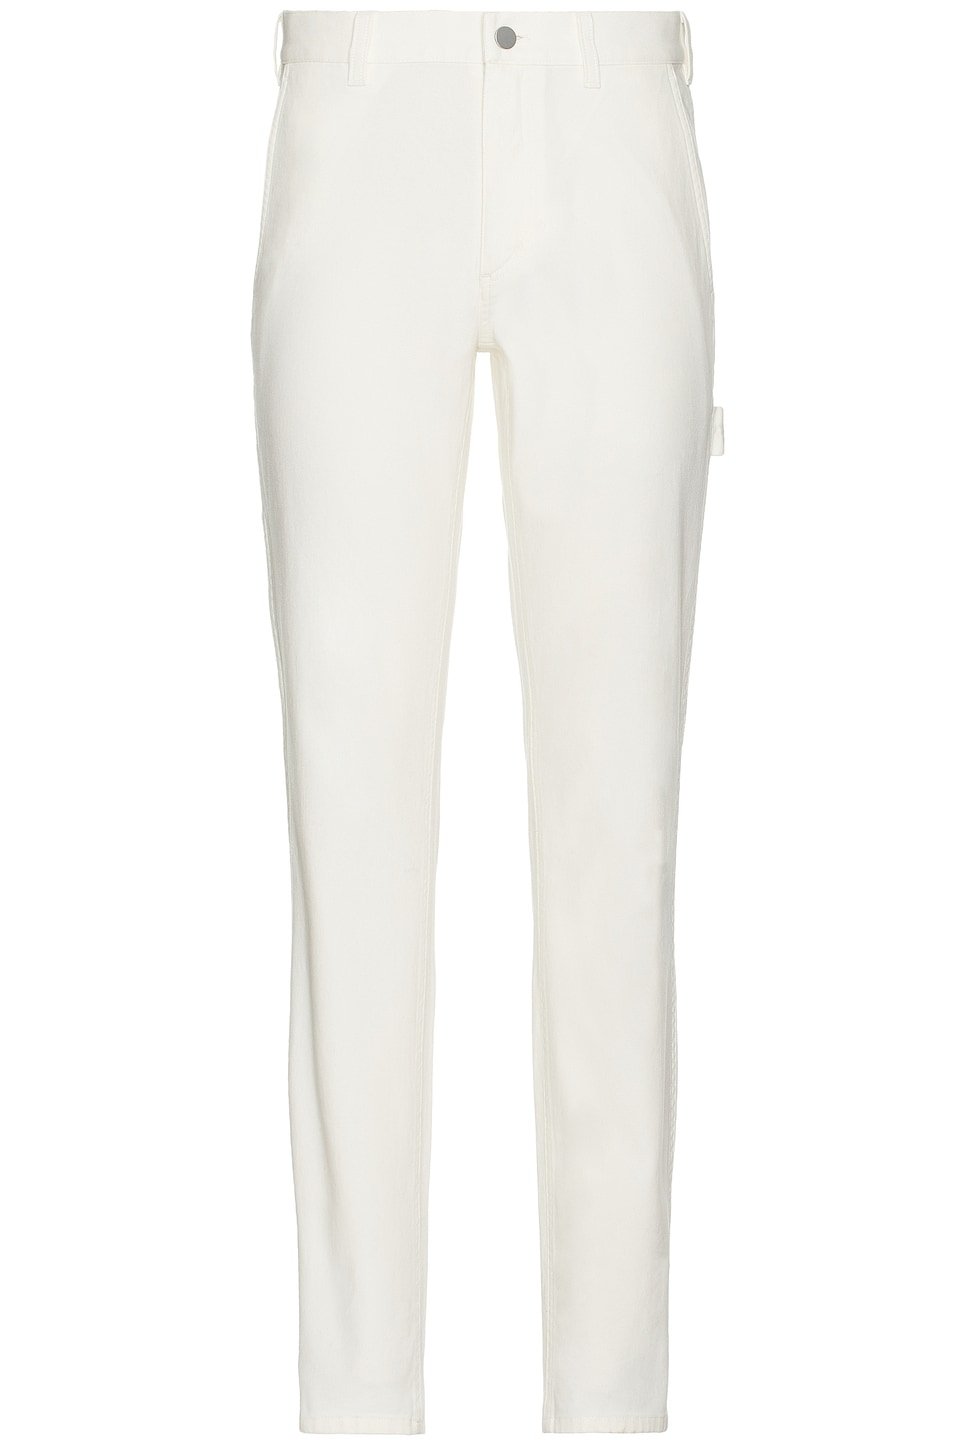 Image 1 of Theory Zaine Carpenter Pants in Ivory